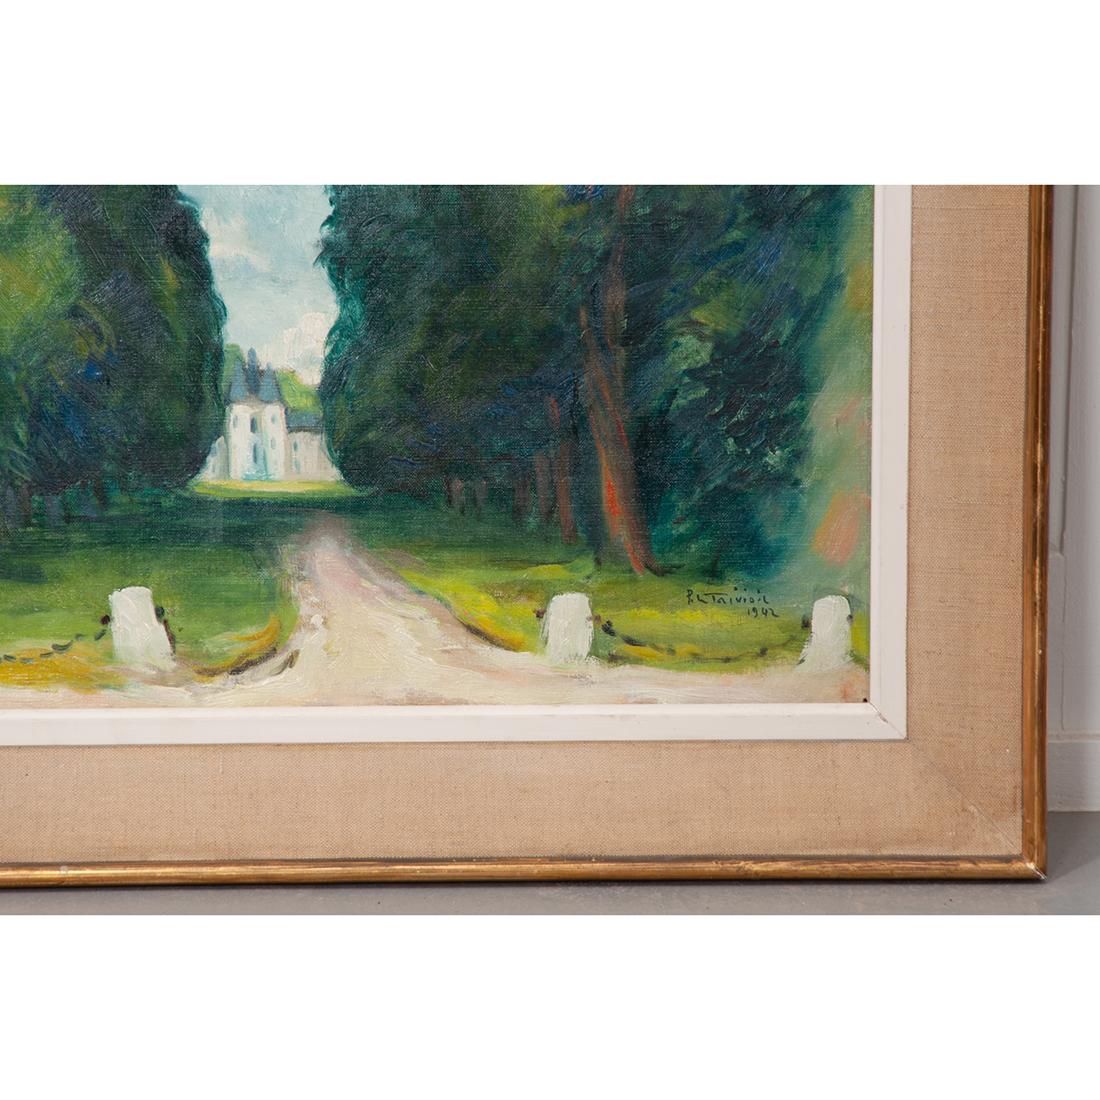 A stunning, framed landscape painting on canvas from Rouen, France. It is signed ‘P. Le Trividic 1942’. Please see detailed pictures for condition.